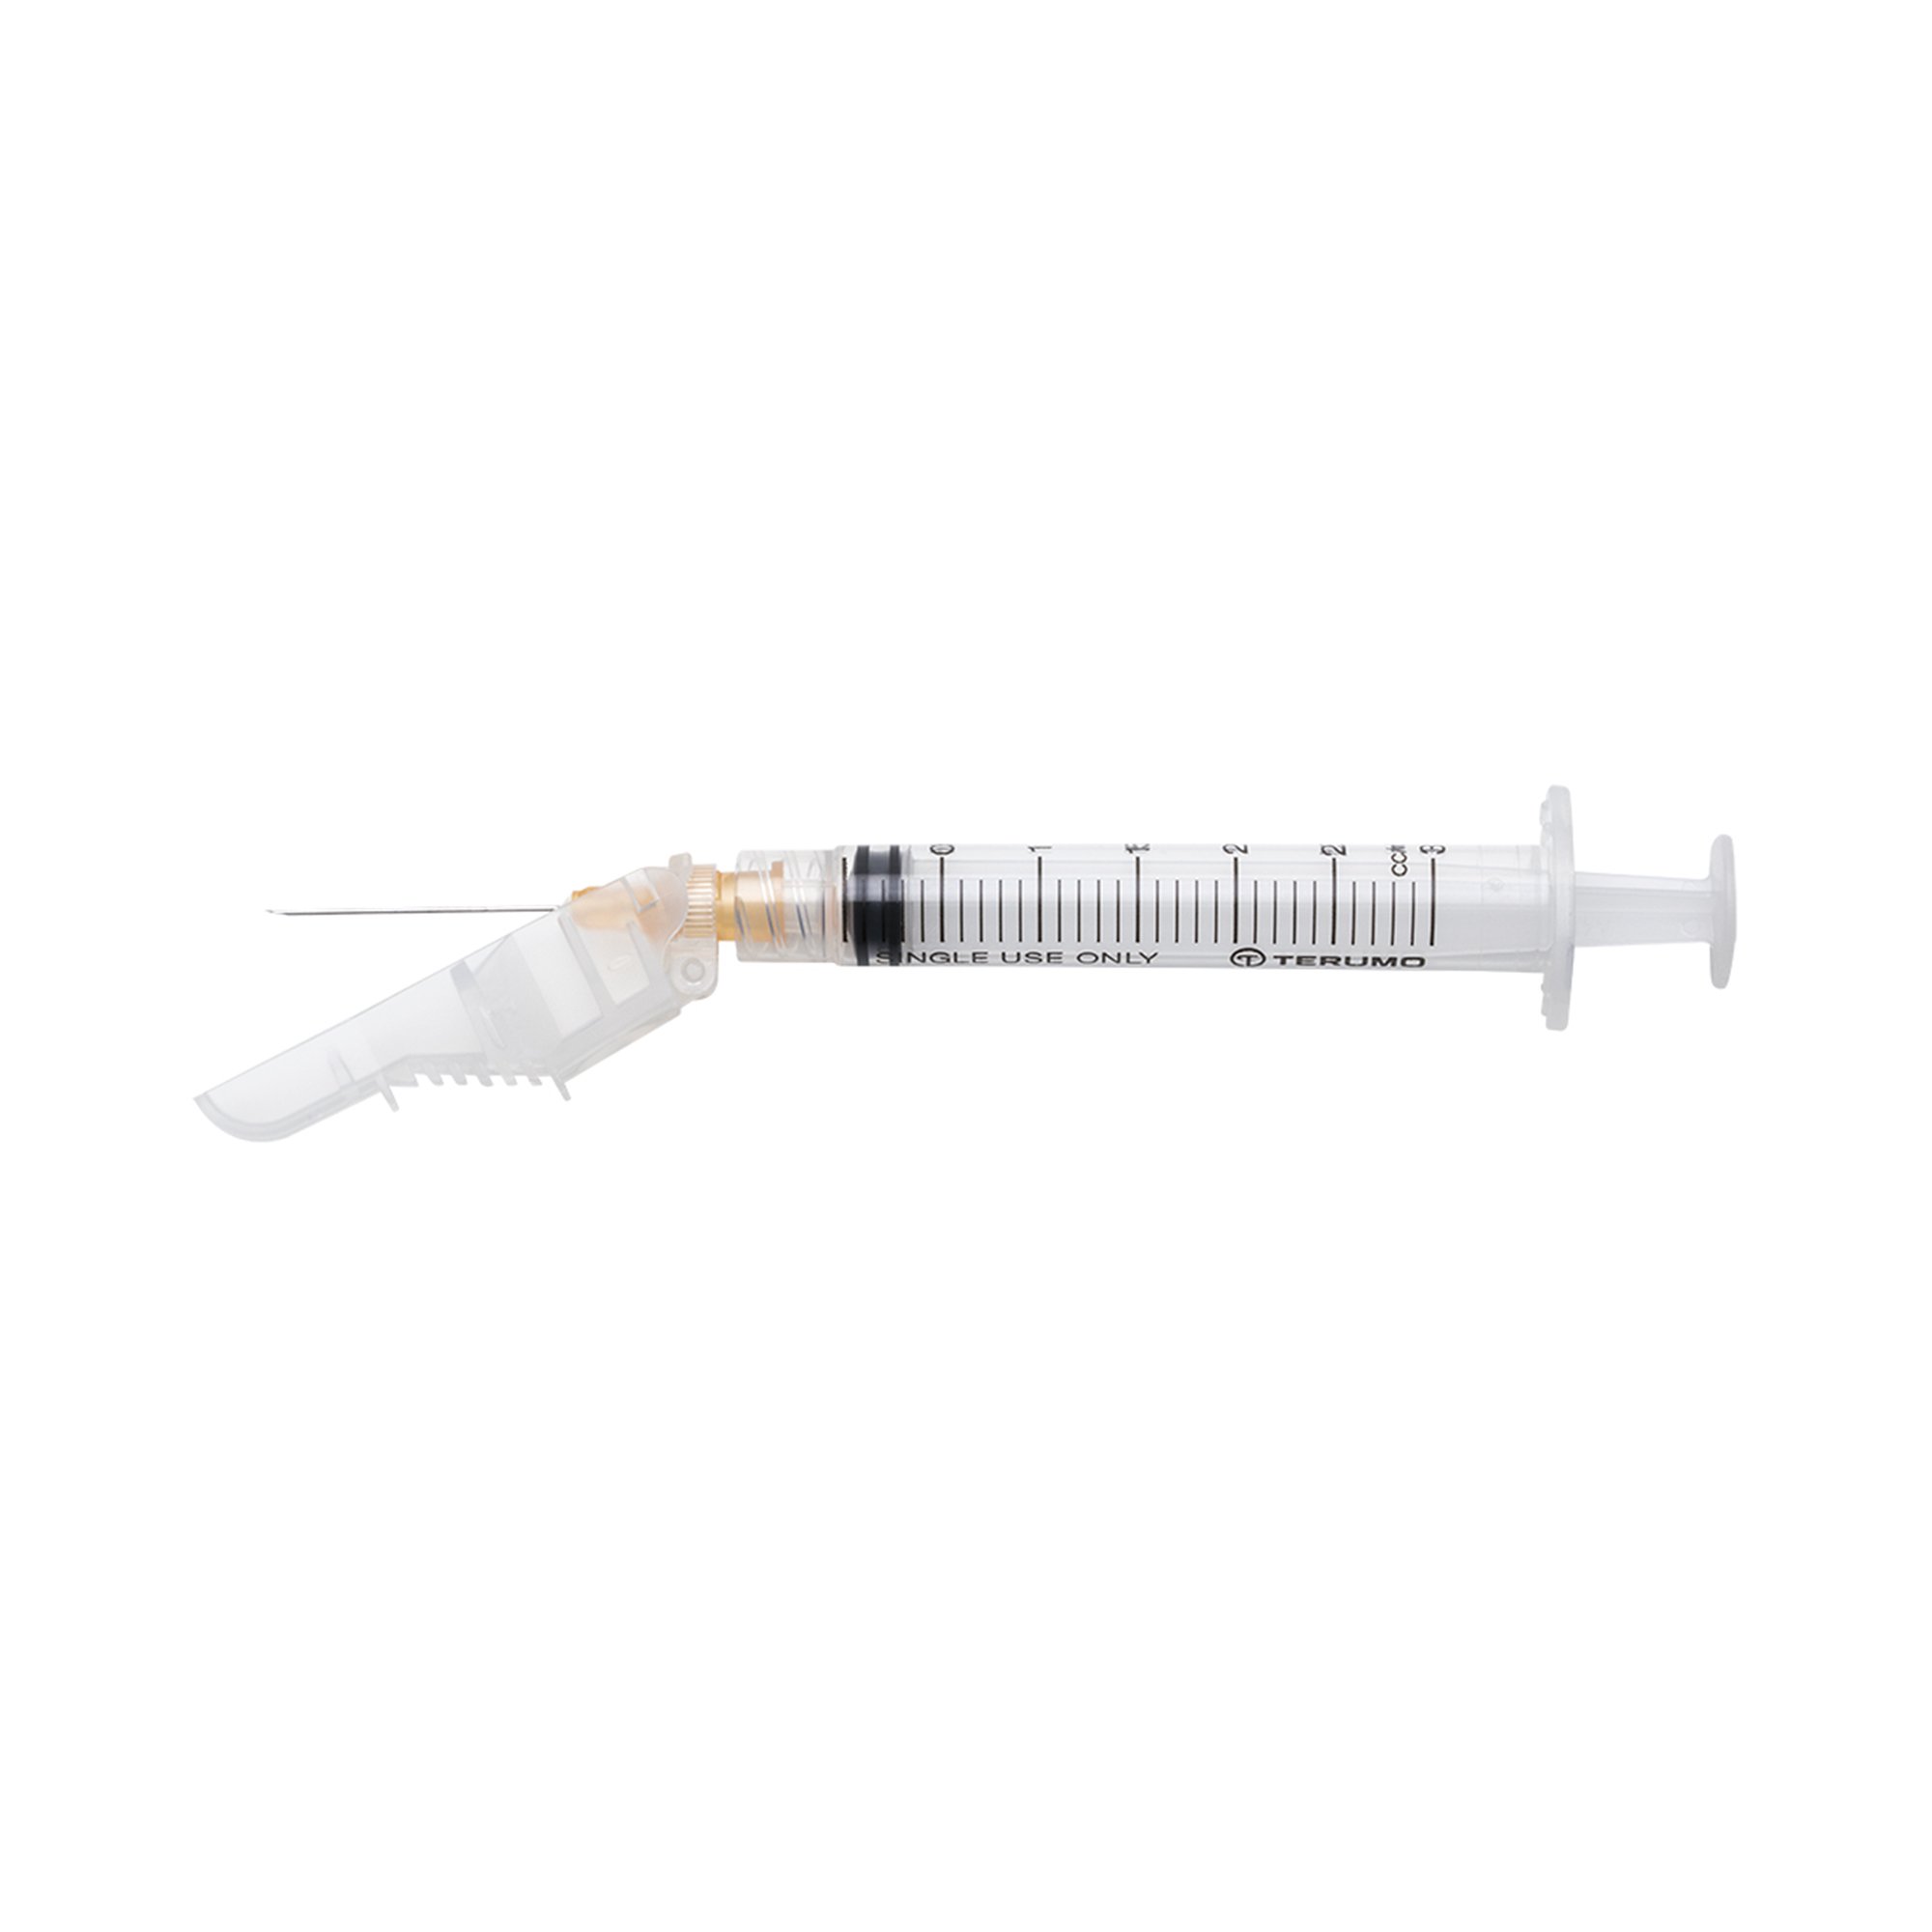 Terumo SG3-03L2525 Syringe with Hypodermic Needle SurGuard 3 mL 25X1 Inch Ultra Thin Wall Hinged Safety Needle 100 EA Needles and Syringes (IM & SC)